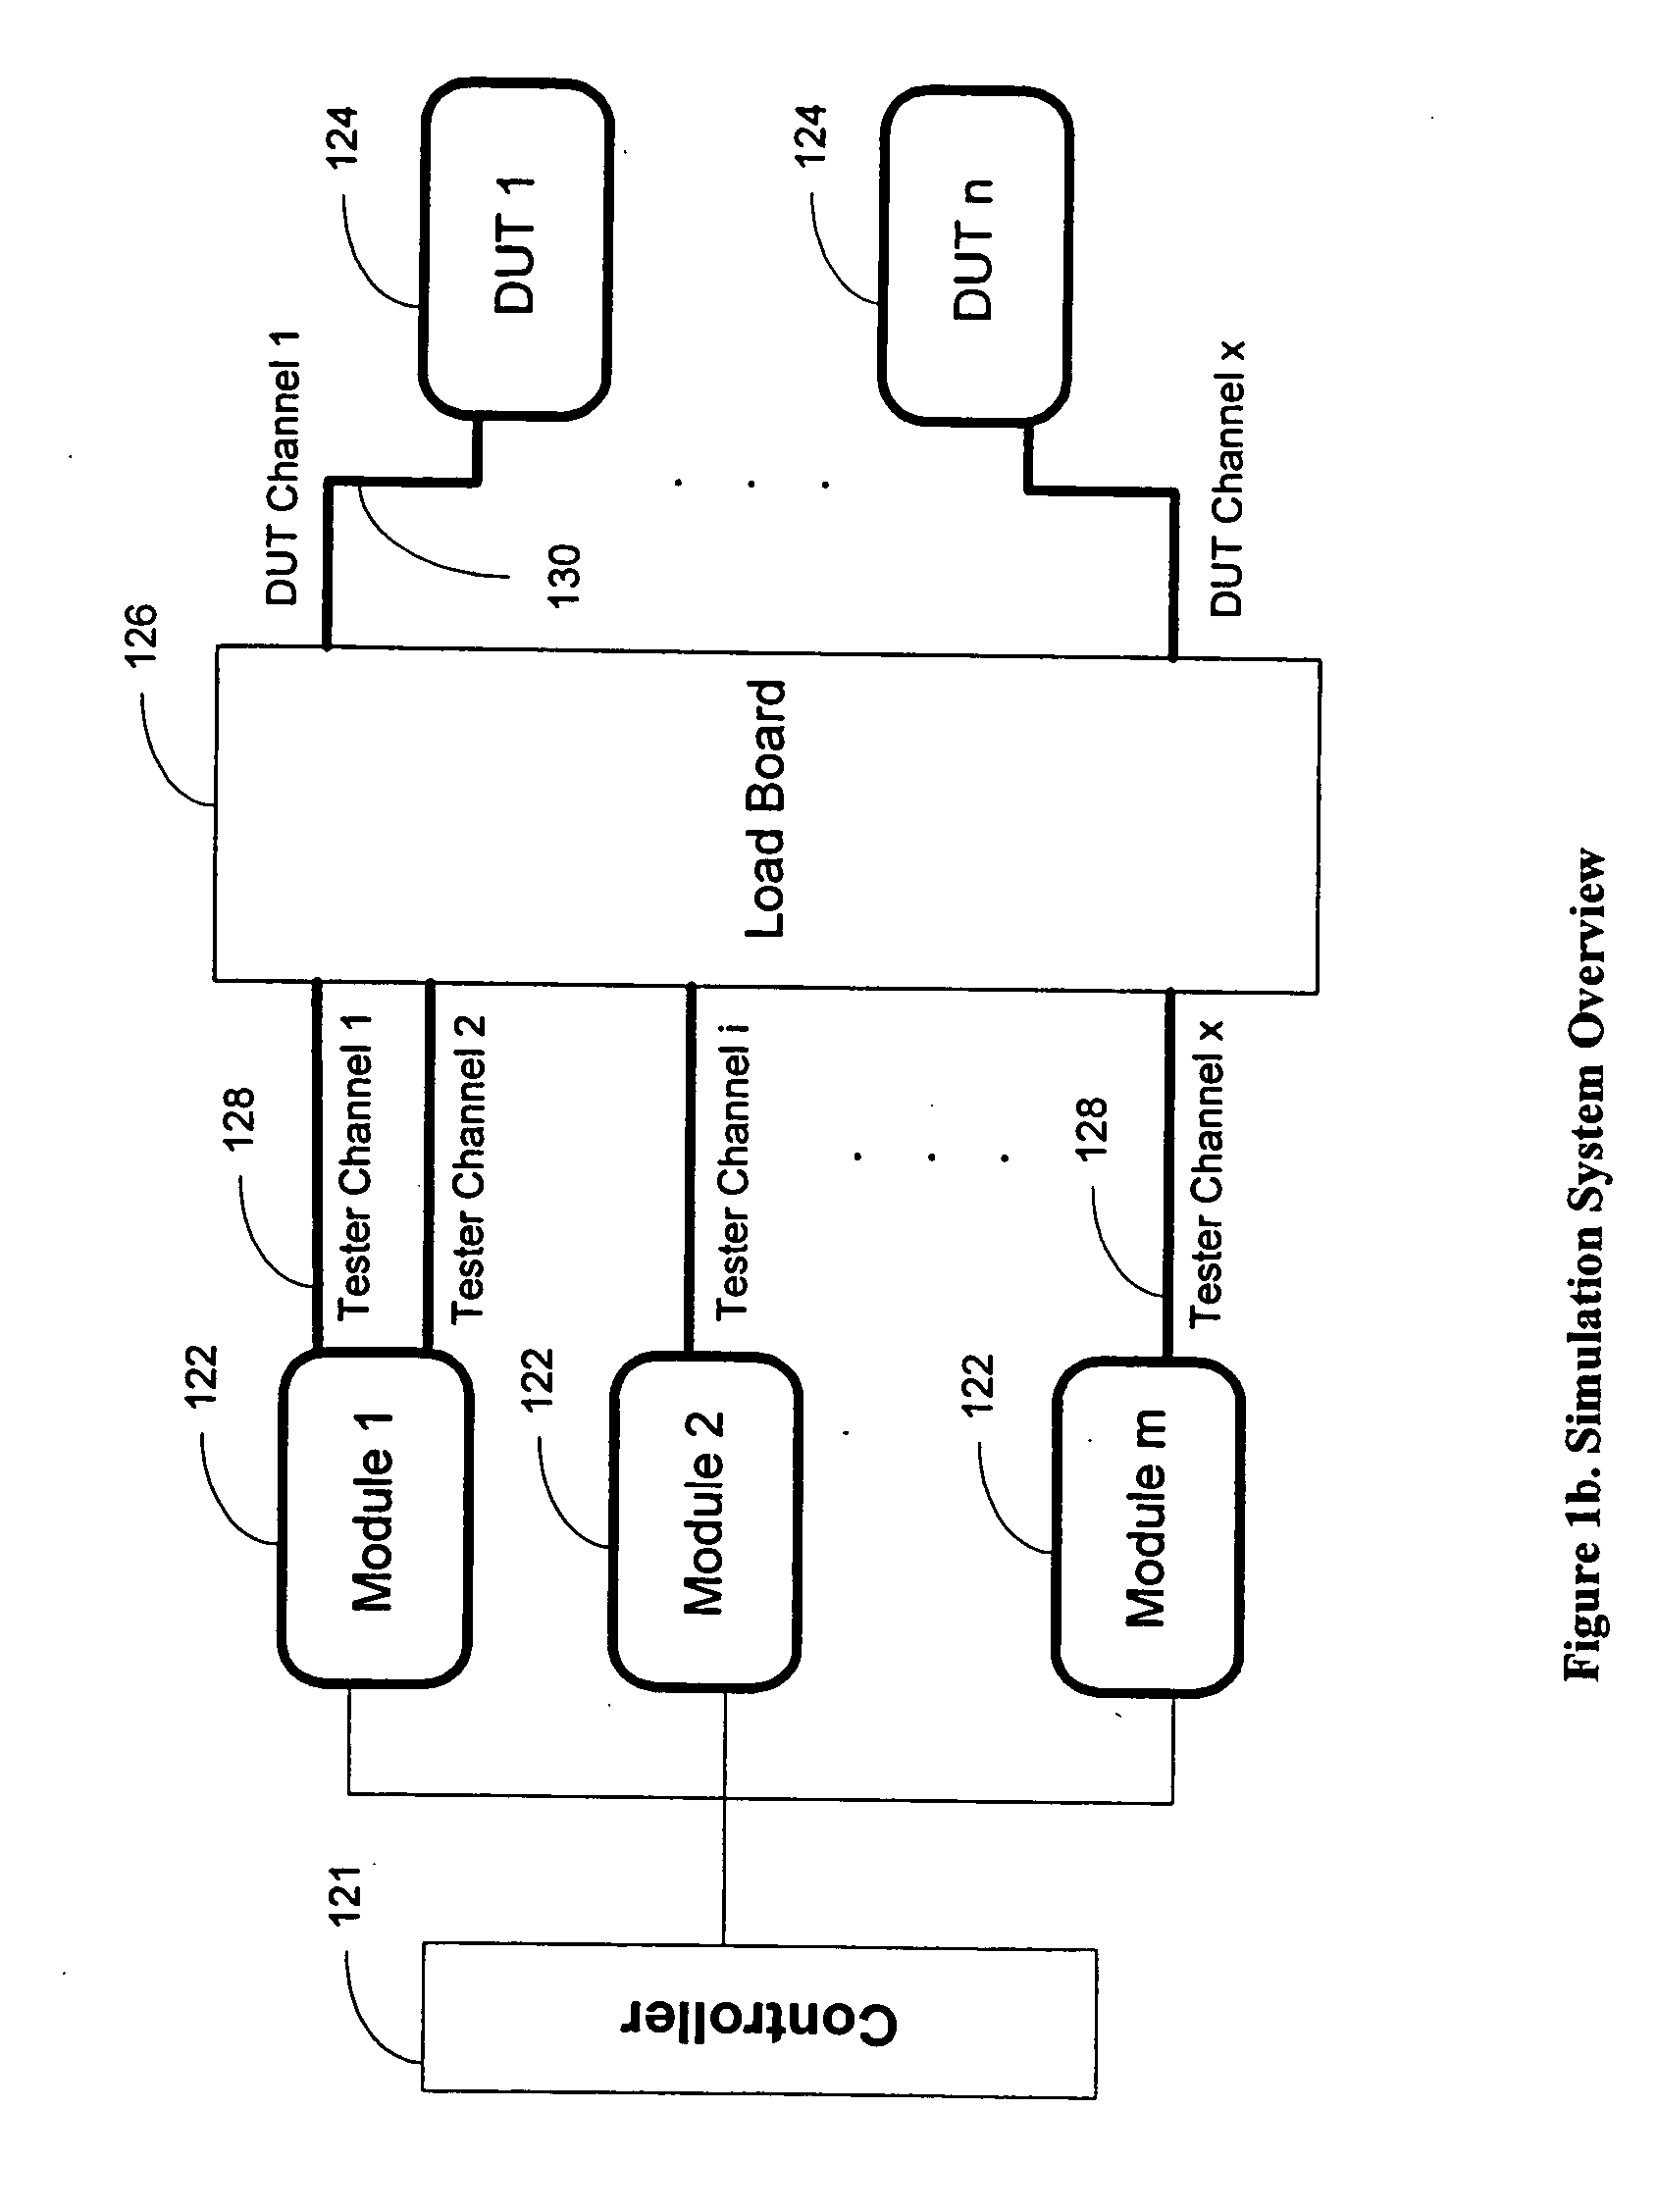 Method and system for simulating a modular test system